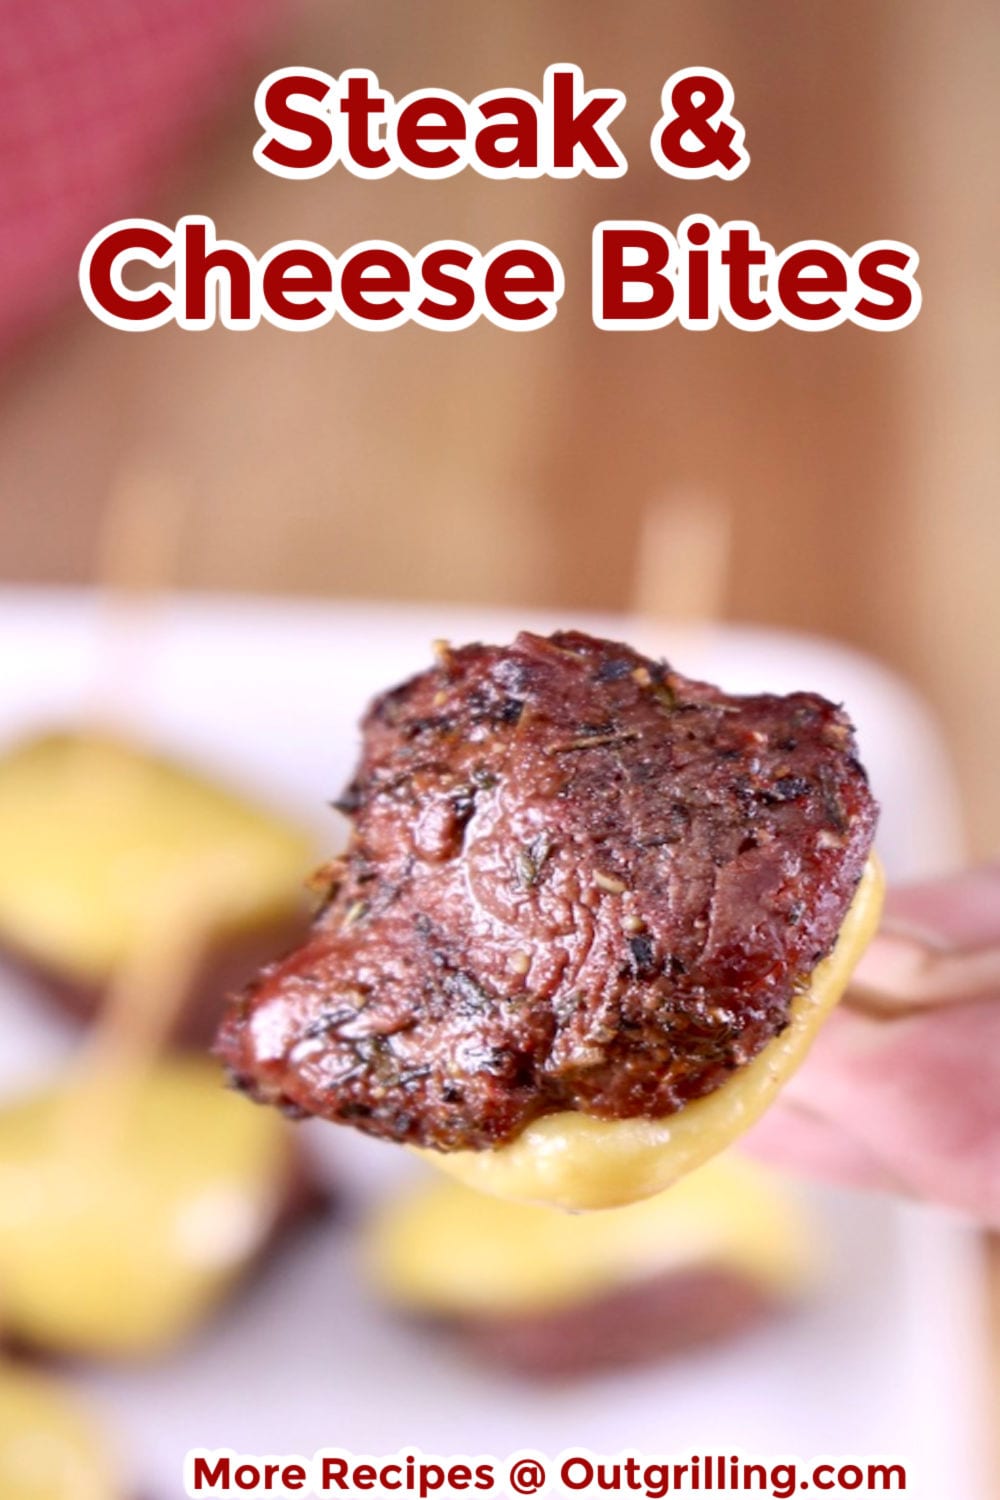 Steak and Cheese Bite appetizers served on a toothpick - closeup view with text overlay